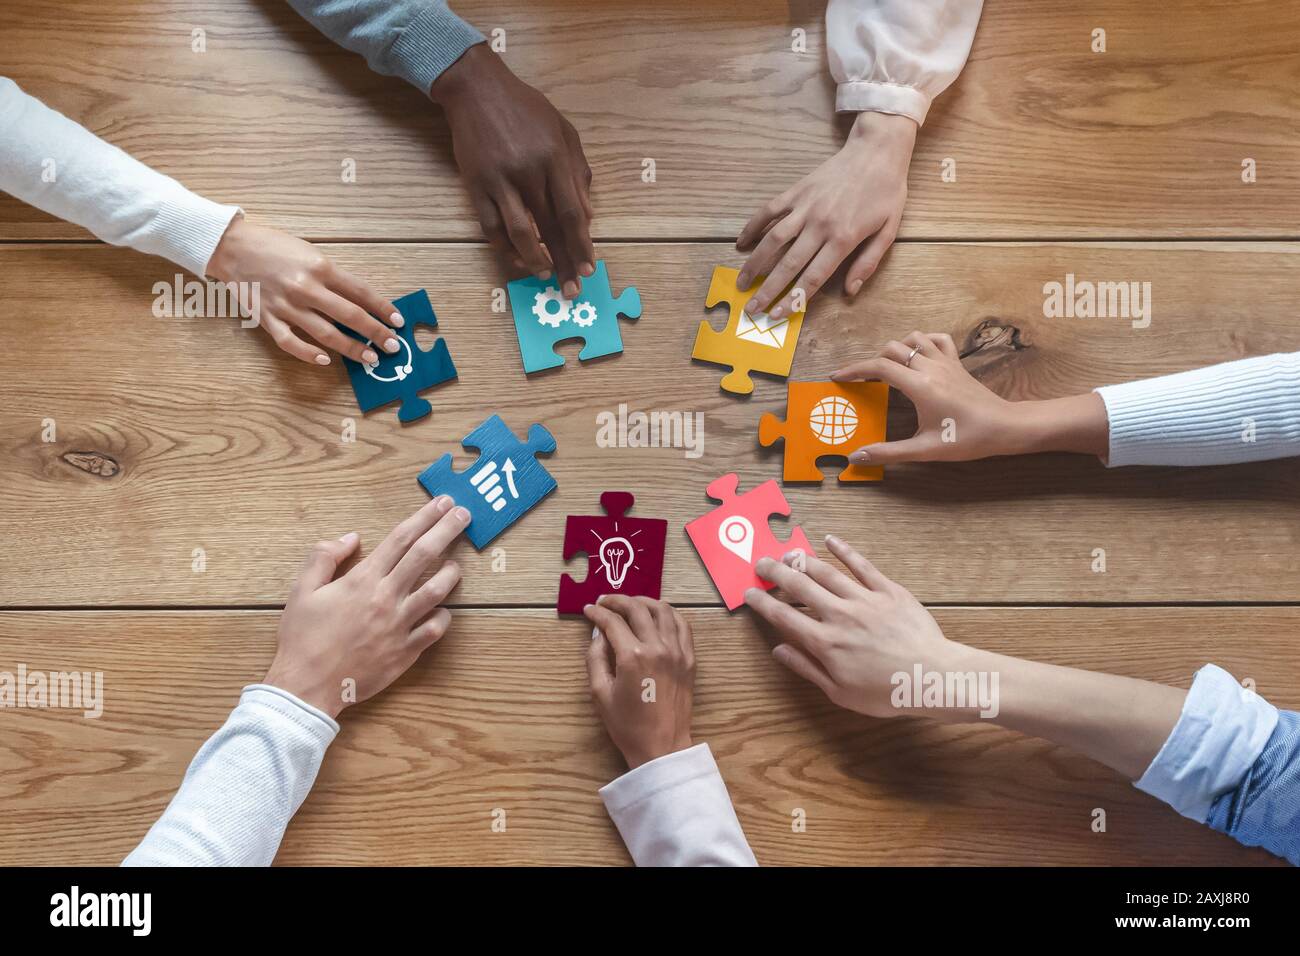 Hands of international coworkers putting colorful puzzles together Stock Photo